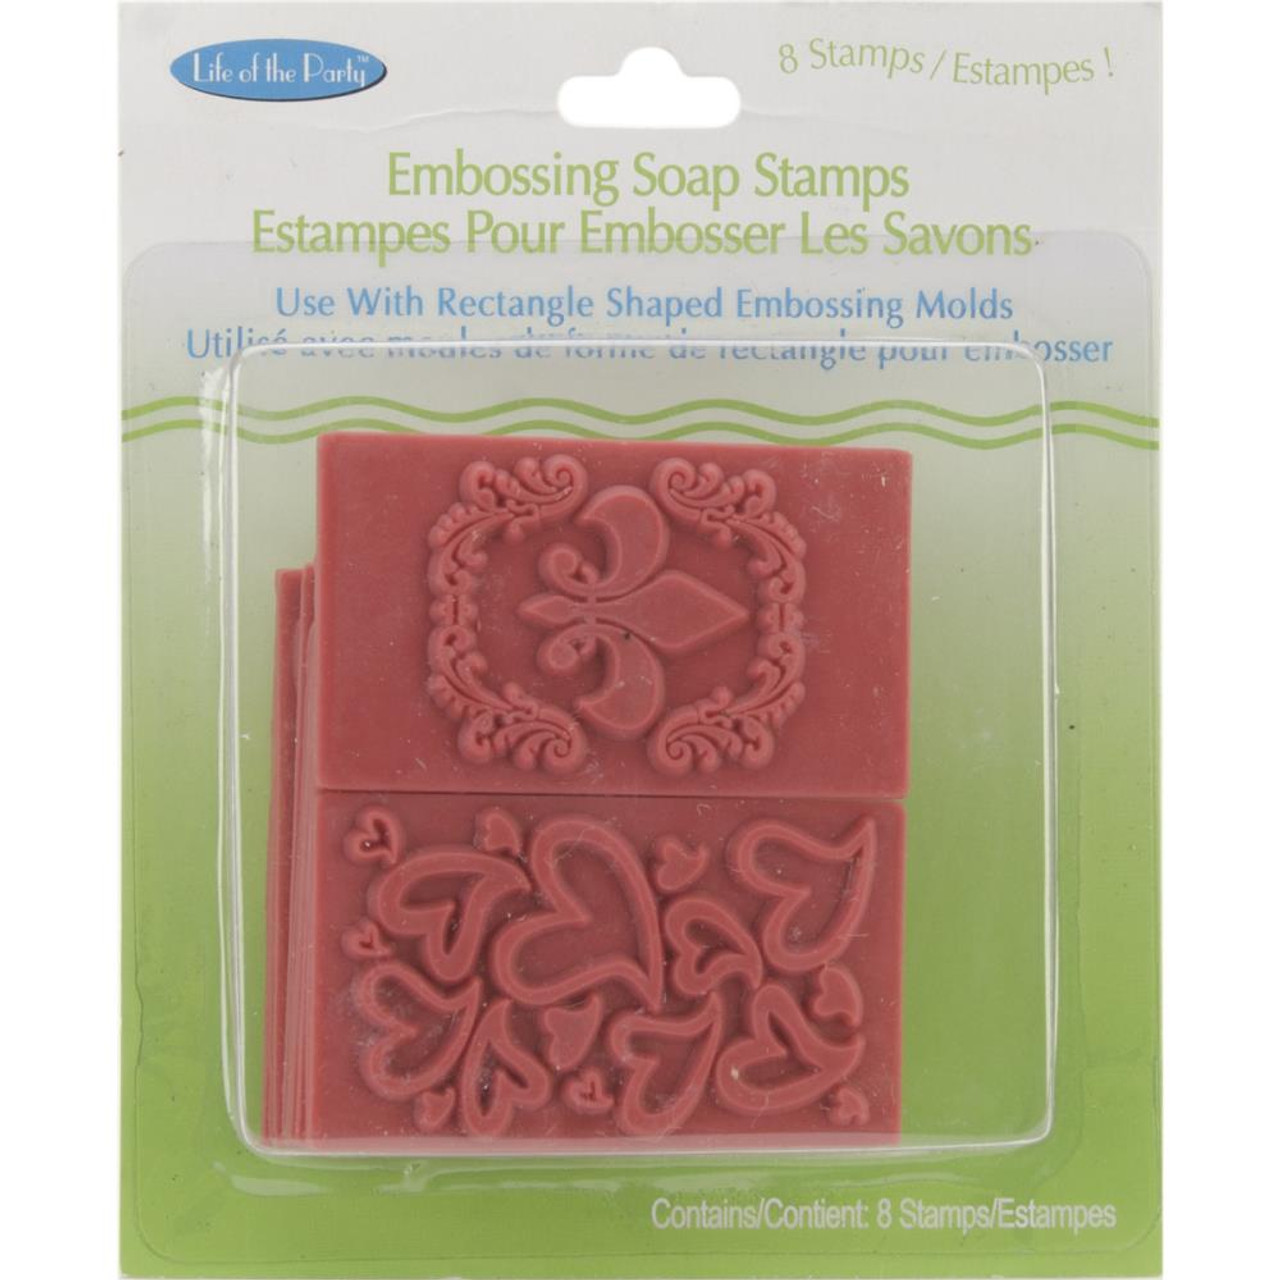 Soap Embossing Stamp Assortment 8/Pkg Rectangles - Poly Clay Play